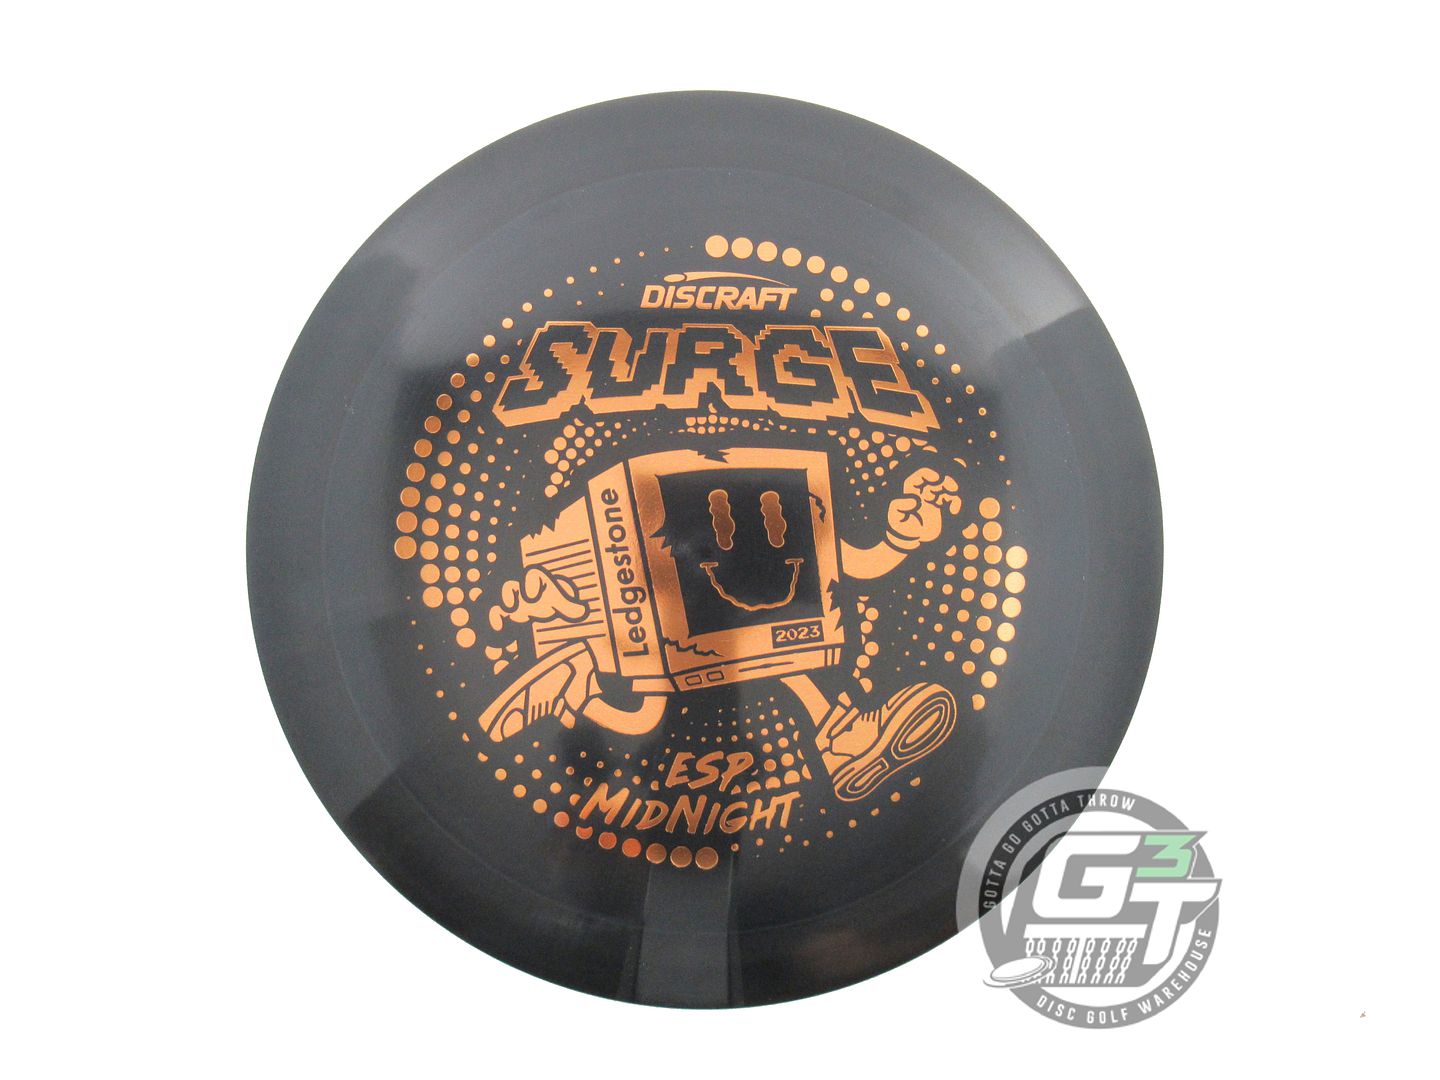 Discraft Limited Edition 2023 Ledgestone Open Midnight ESP Surge Distance Driver Golf Disc (Individually Listed)